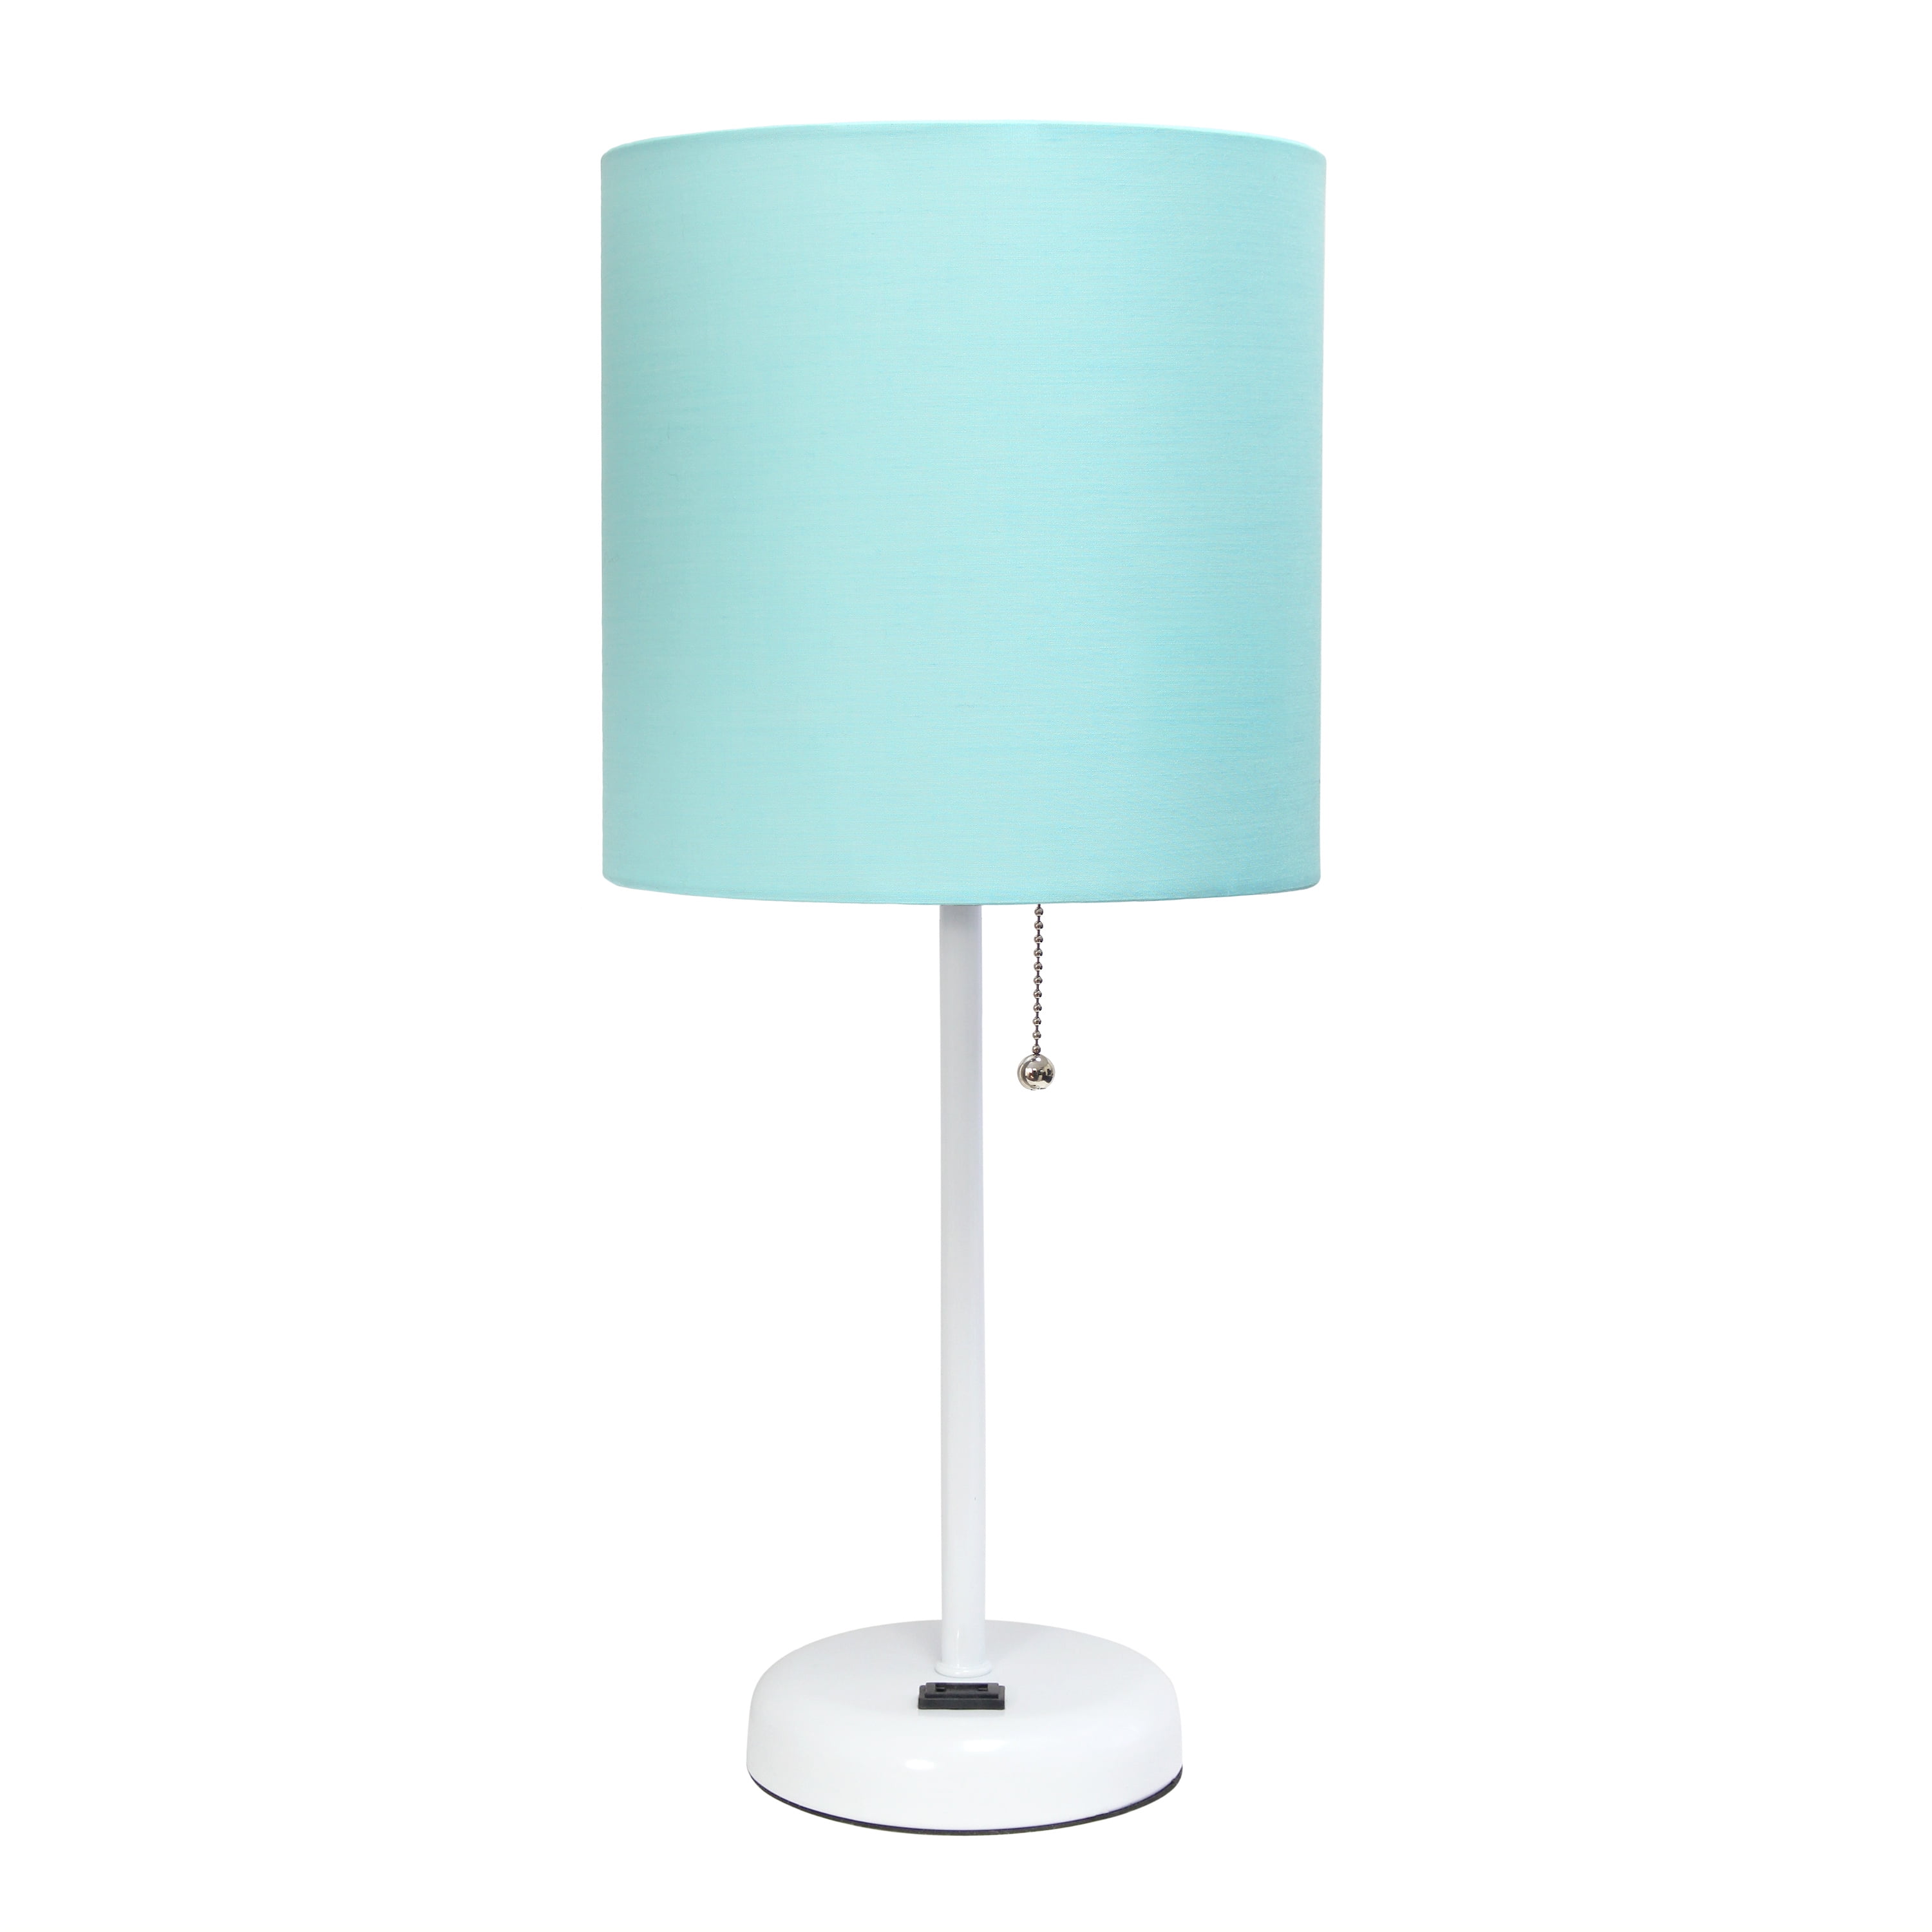 Lt2024-aow White Stick Table Lamp With Charging Outlet & Fabric Shade, Aqua